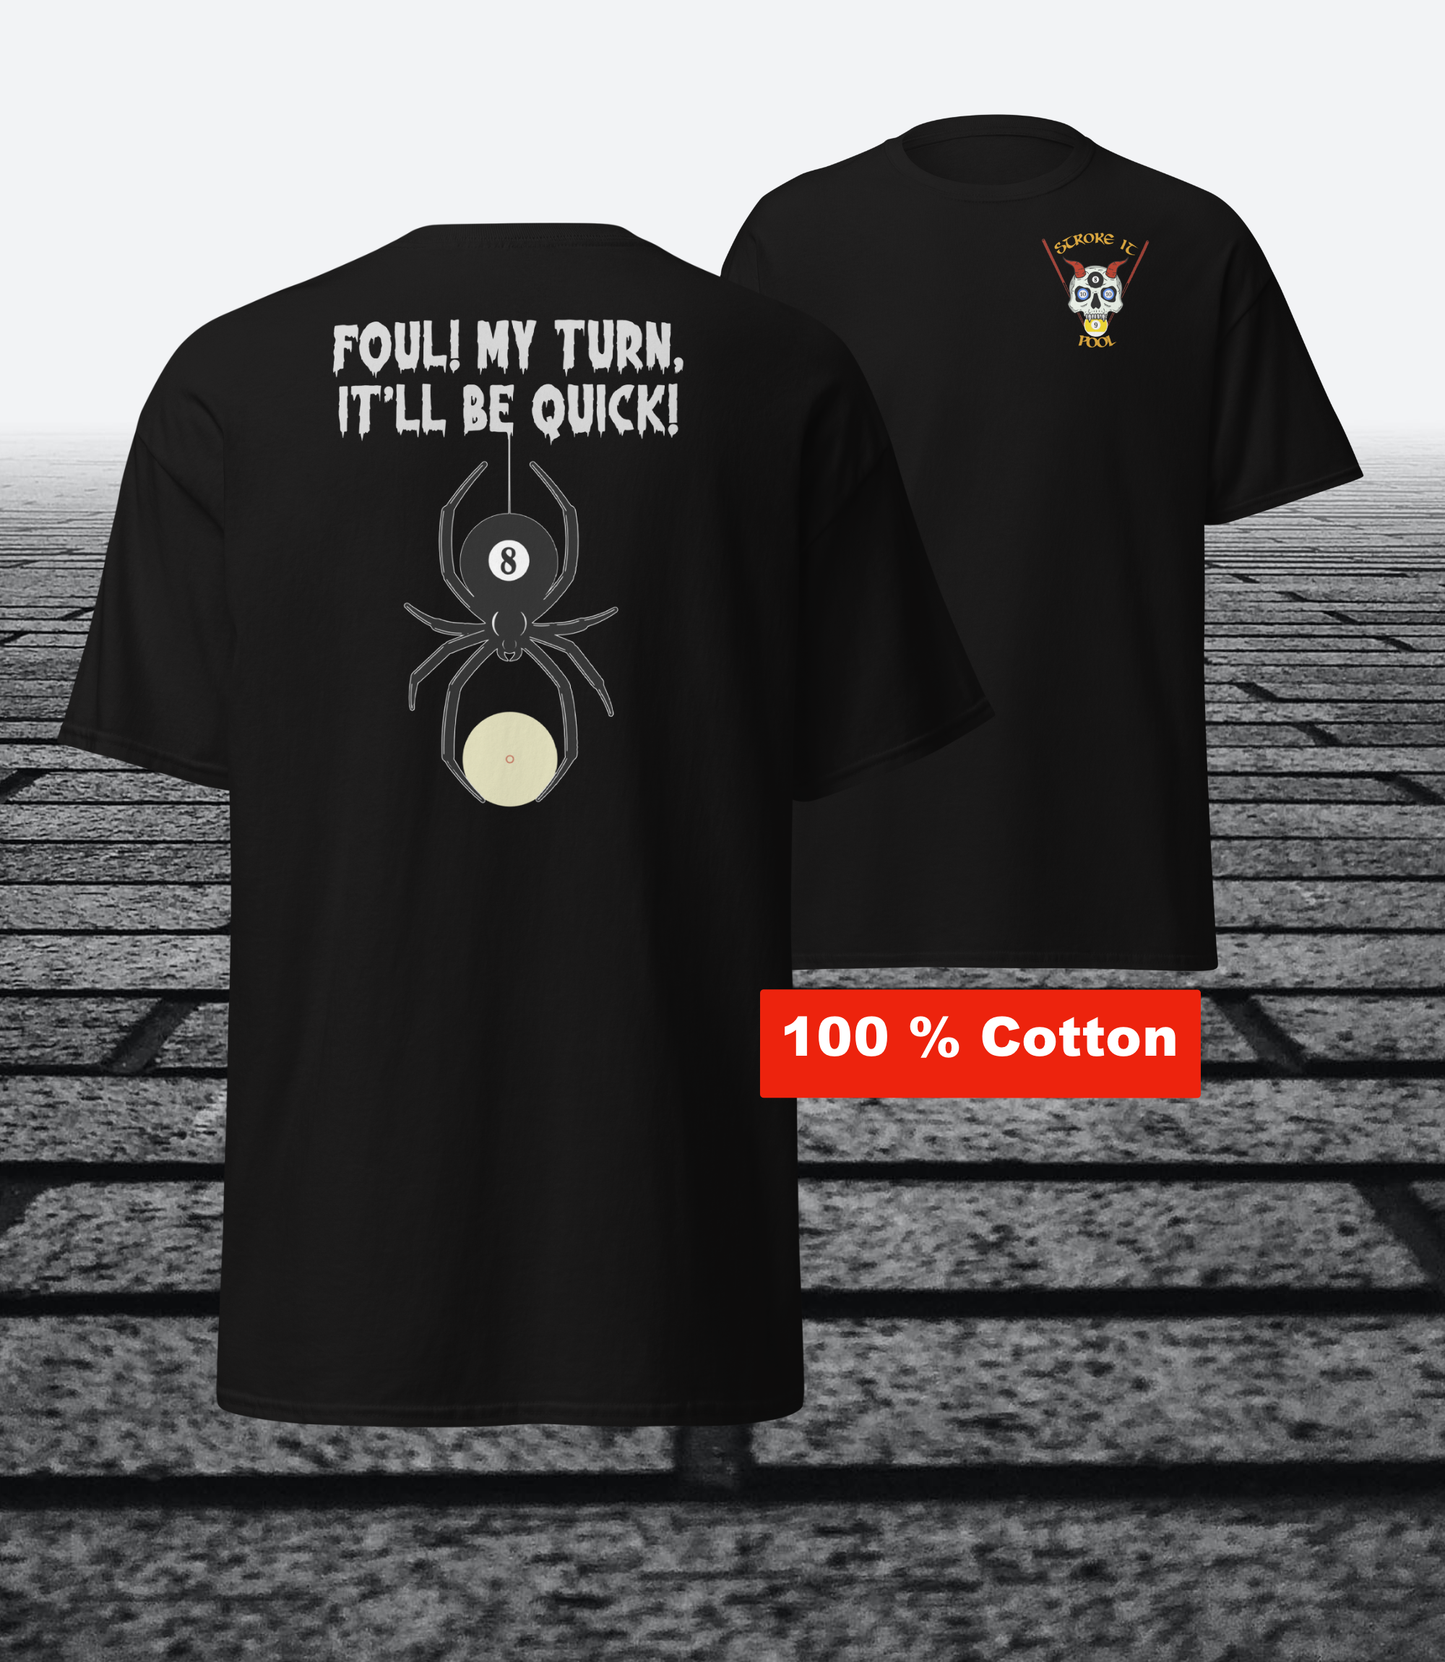 Foul, my turn, It'll be quick, with logo on the front, Cotton t-shirt